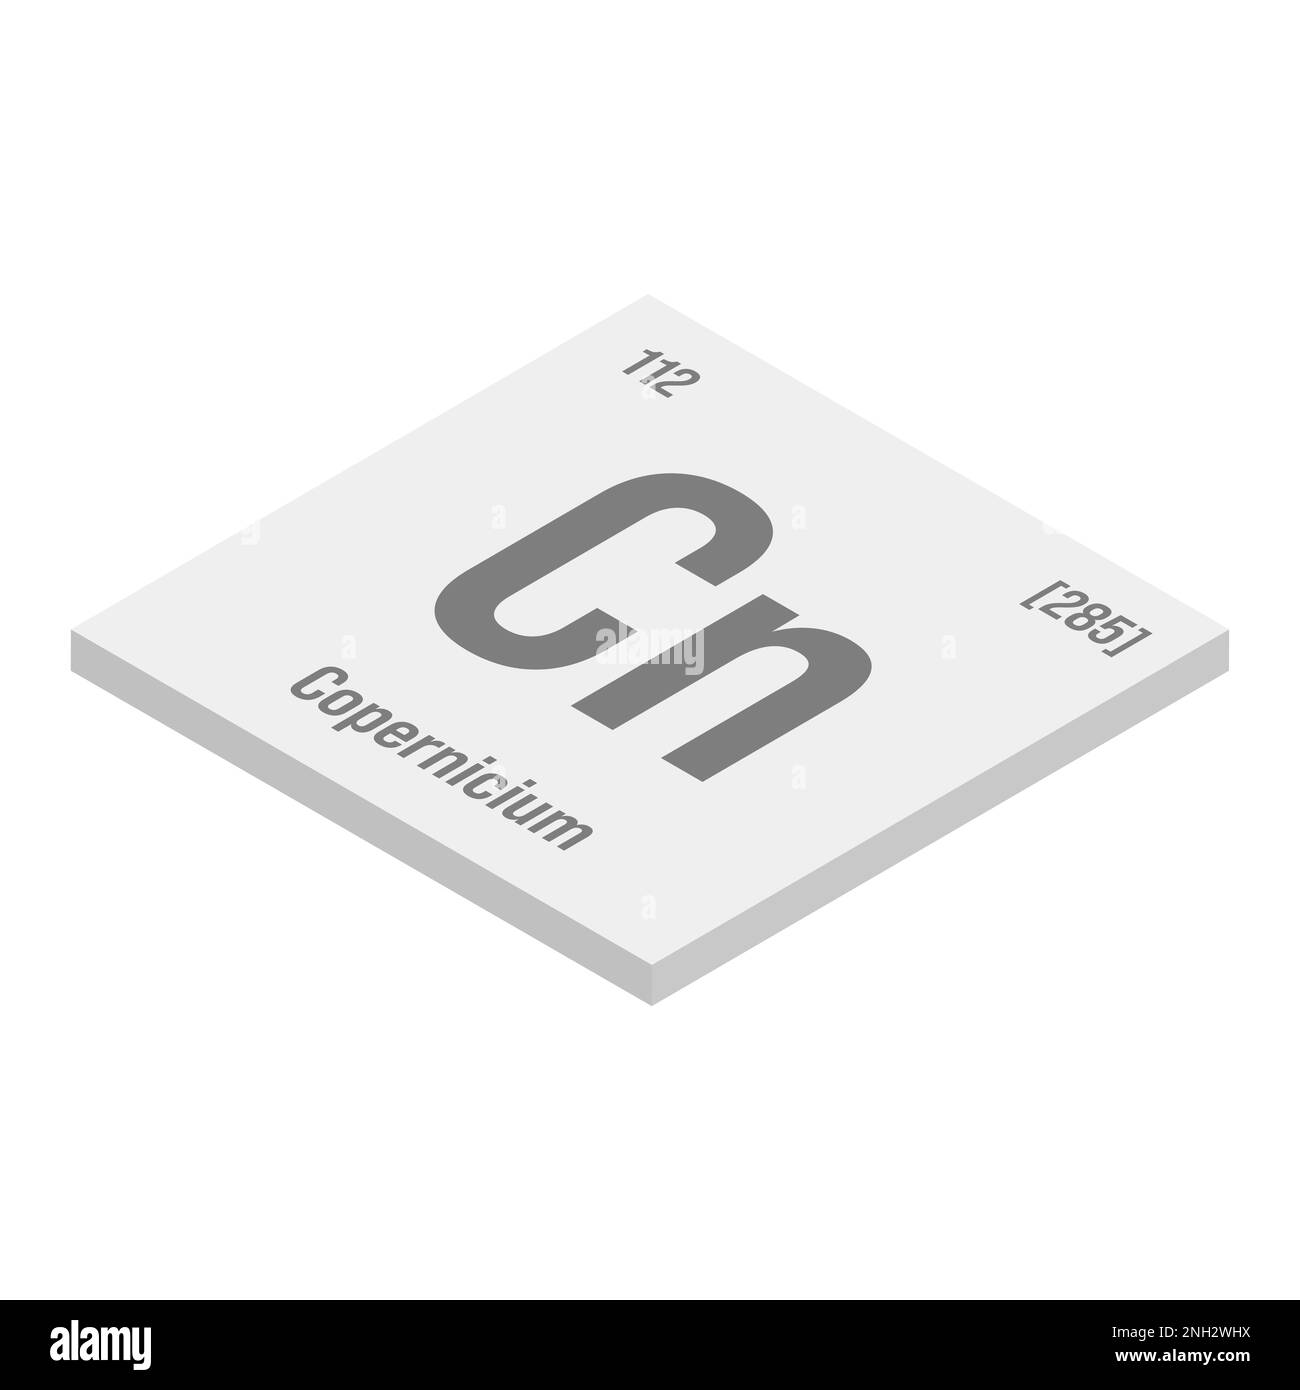 Chromium, Cr, gray 3D isometric illustration of periodic table element with name, symbol, atomic number and weight. Transition metal with various industrial uses, such as in stainless steel, electroplating, and as a pigment in dyes and paint. Stock Vector